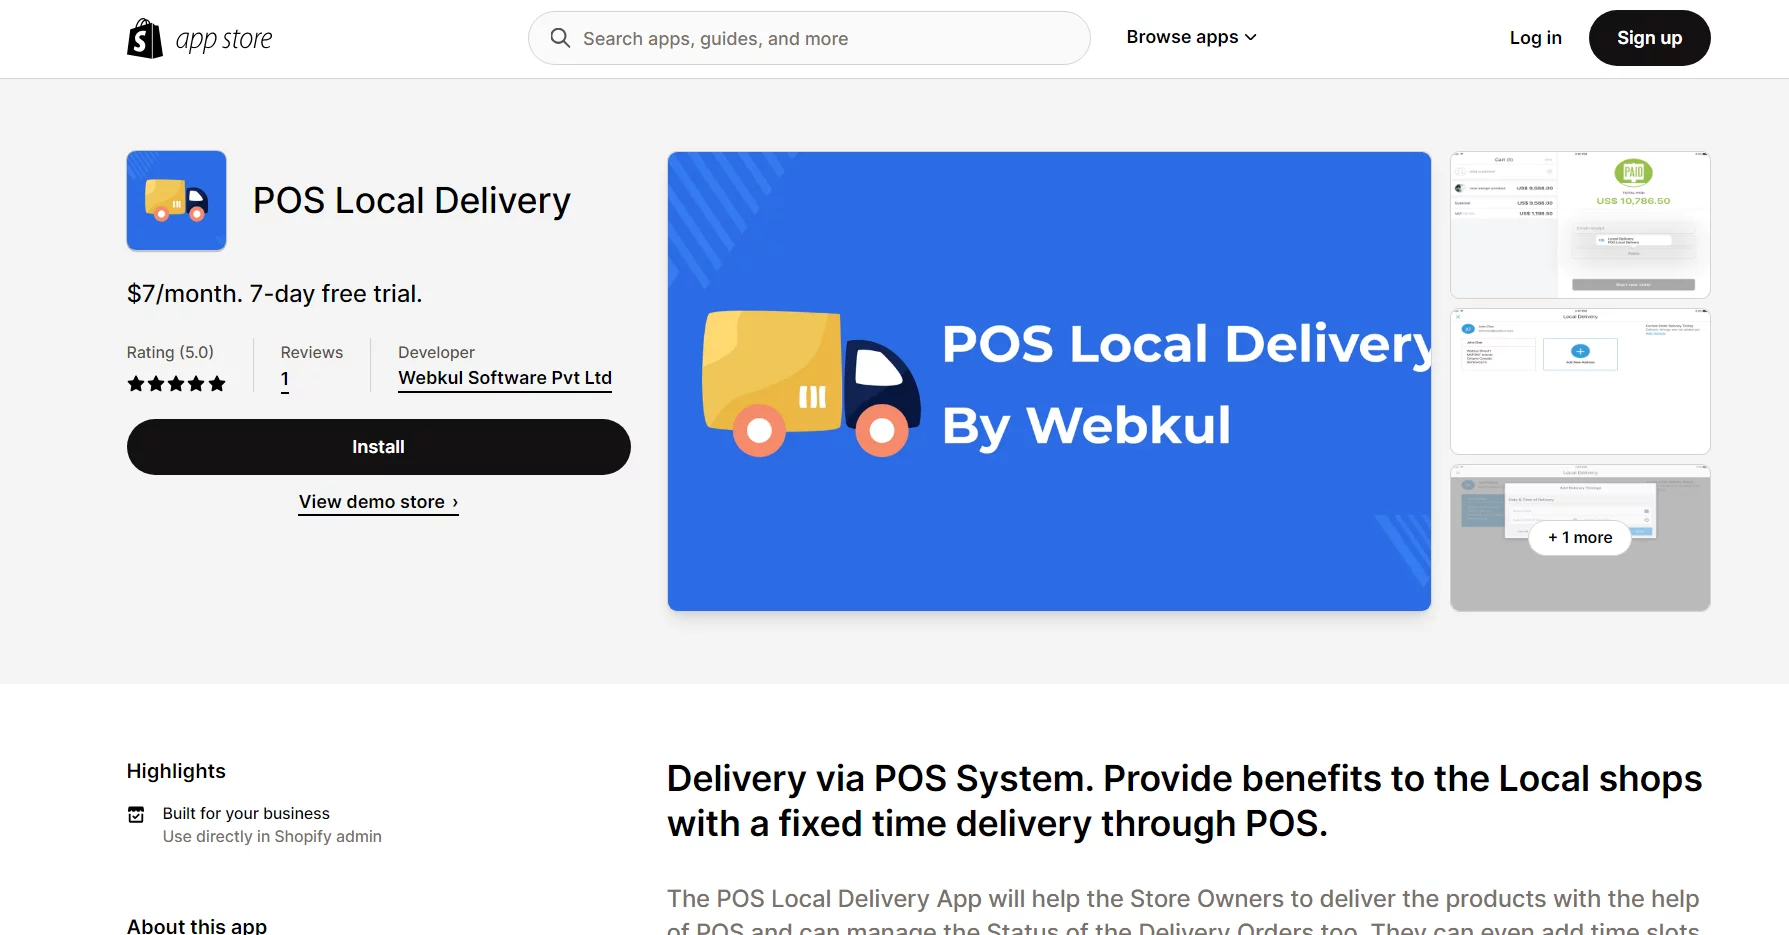 POS Local Delivery